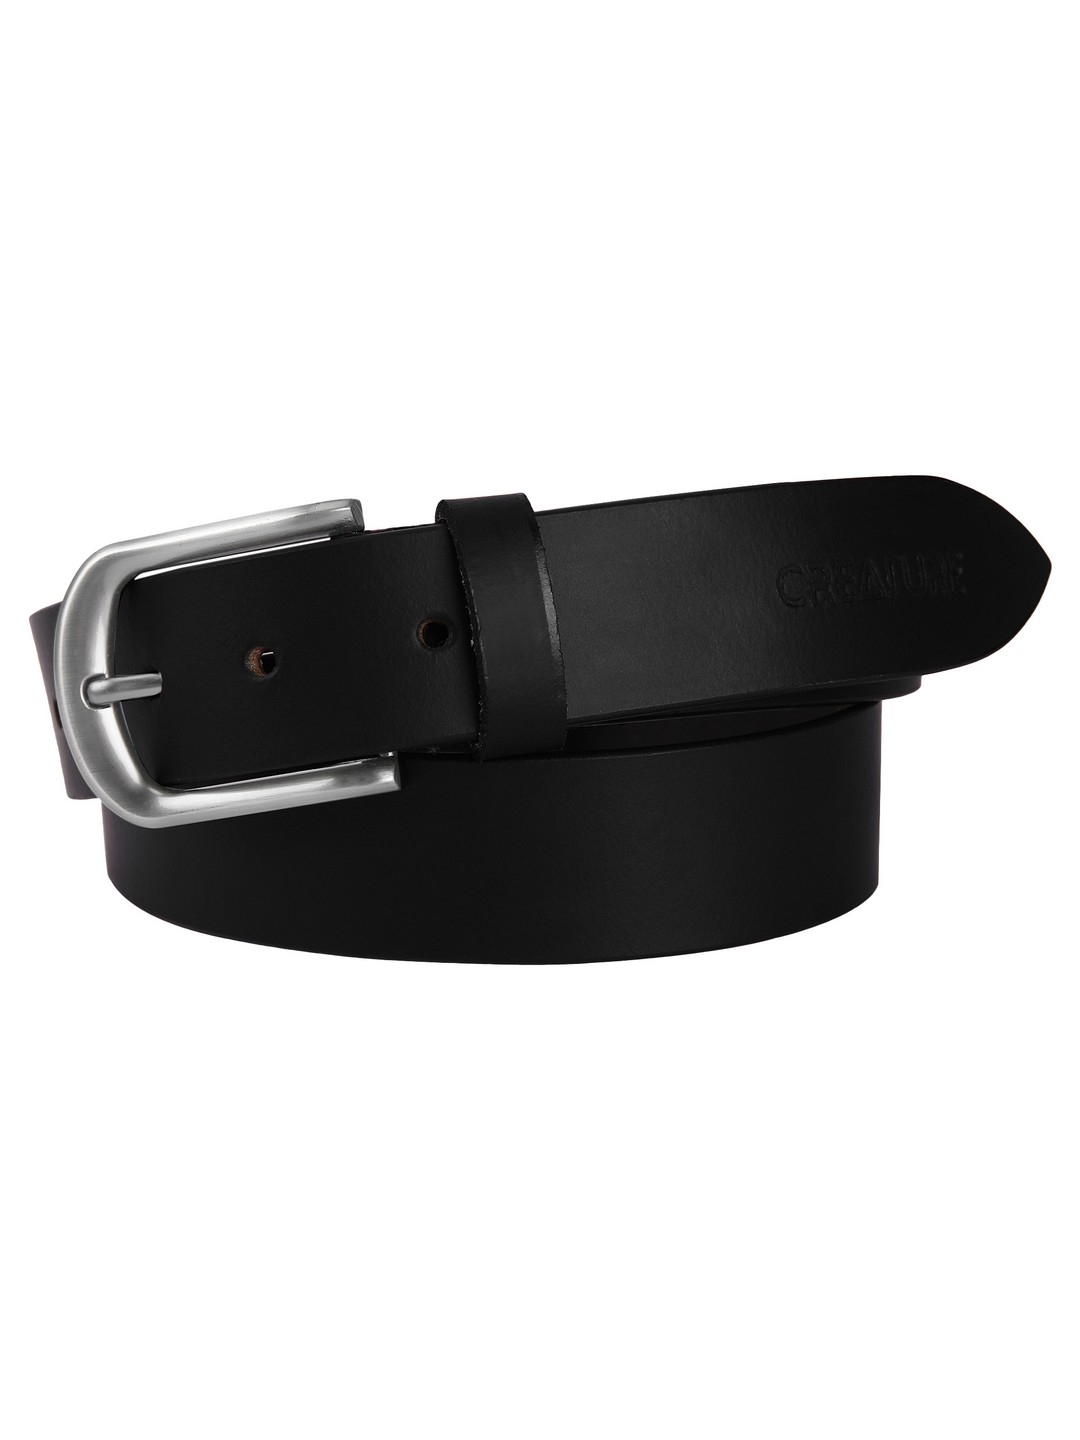 CREATURE | Creature Formal/Casual Black Genuine Leather Belts For Men 1